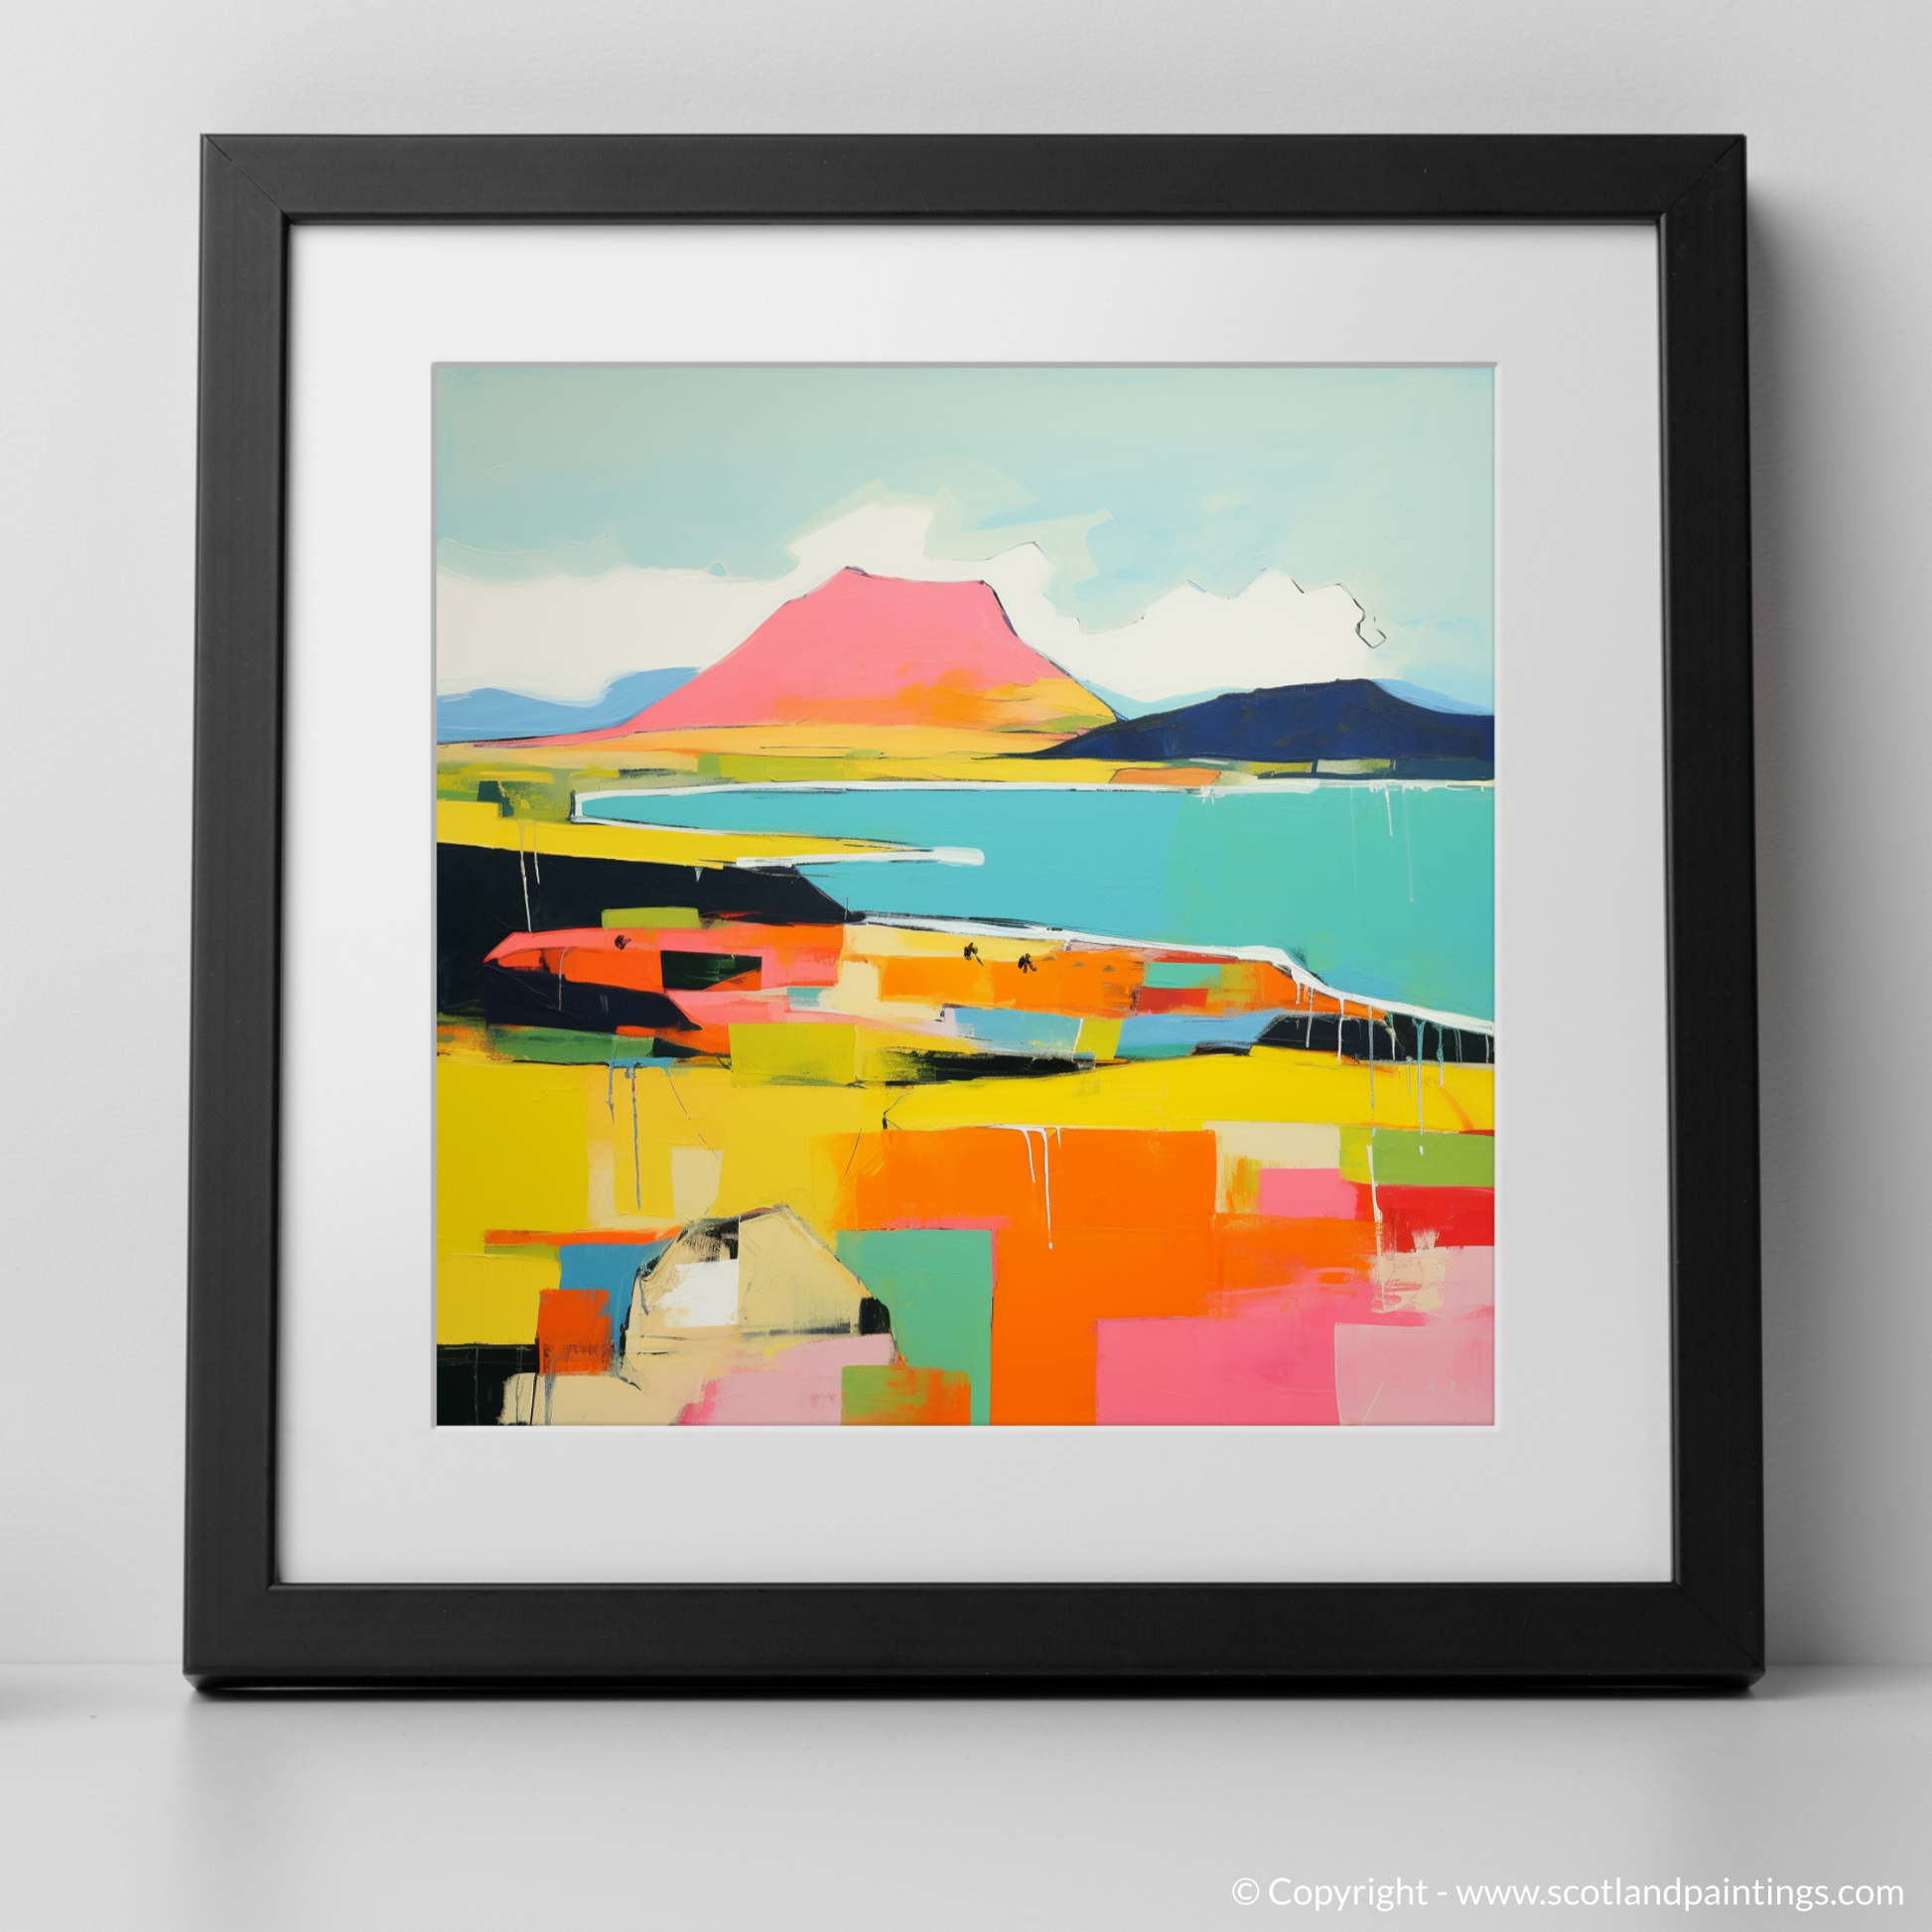 Art Print of Isle of Arran, Firth of Clyde in summer with a black frame